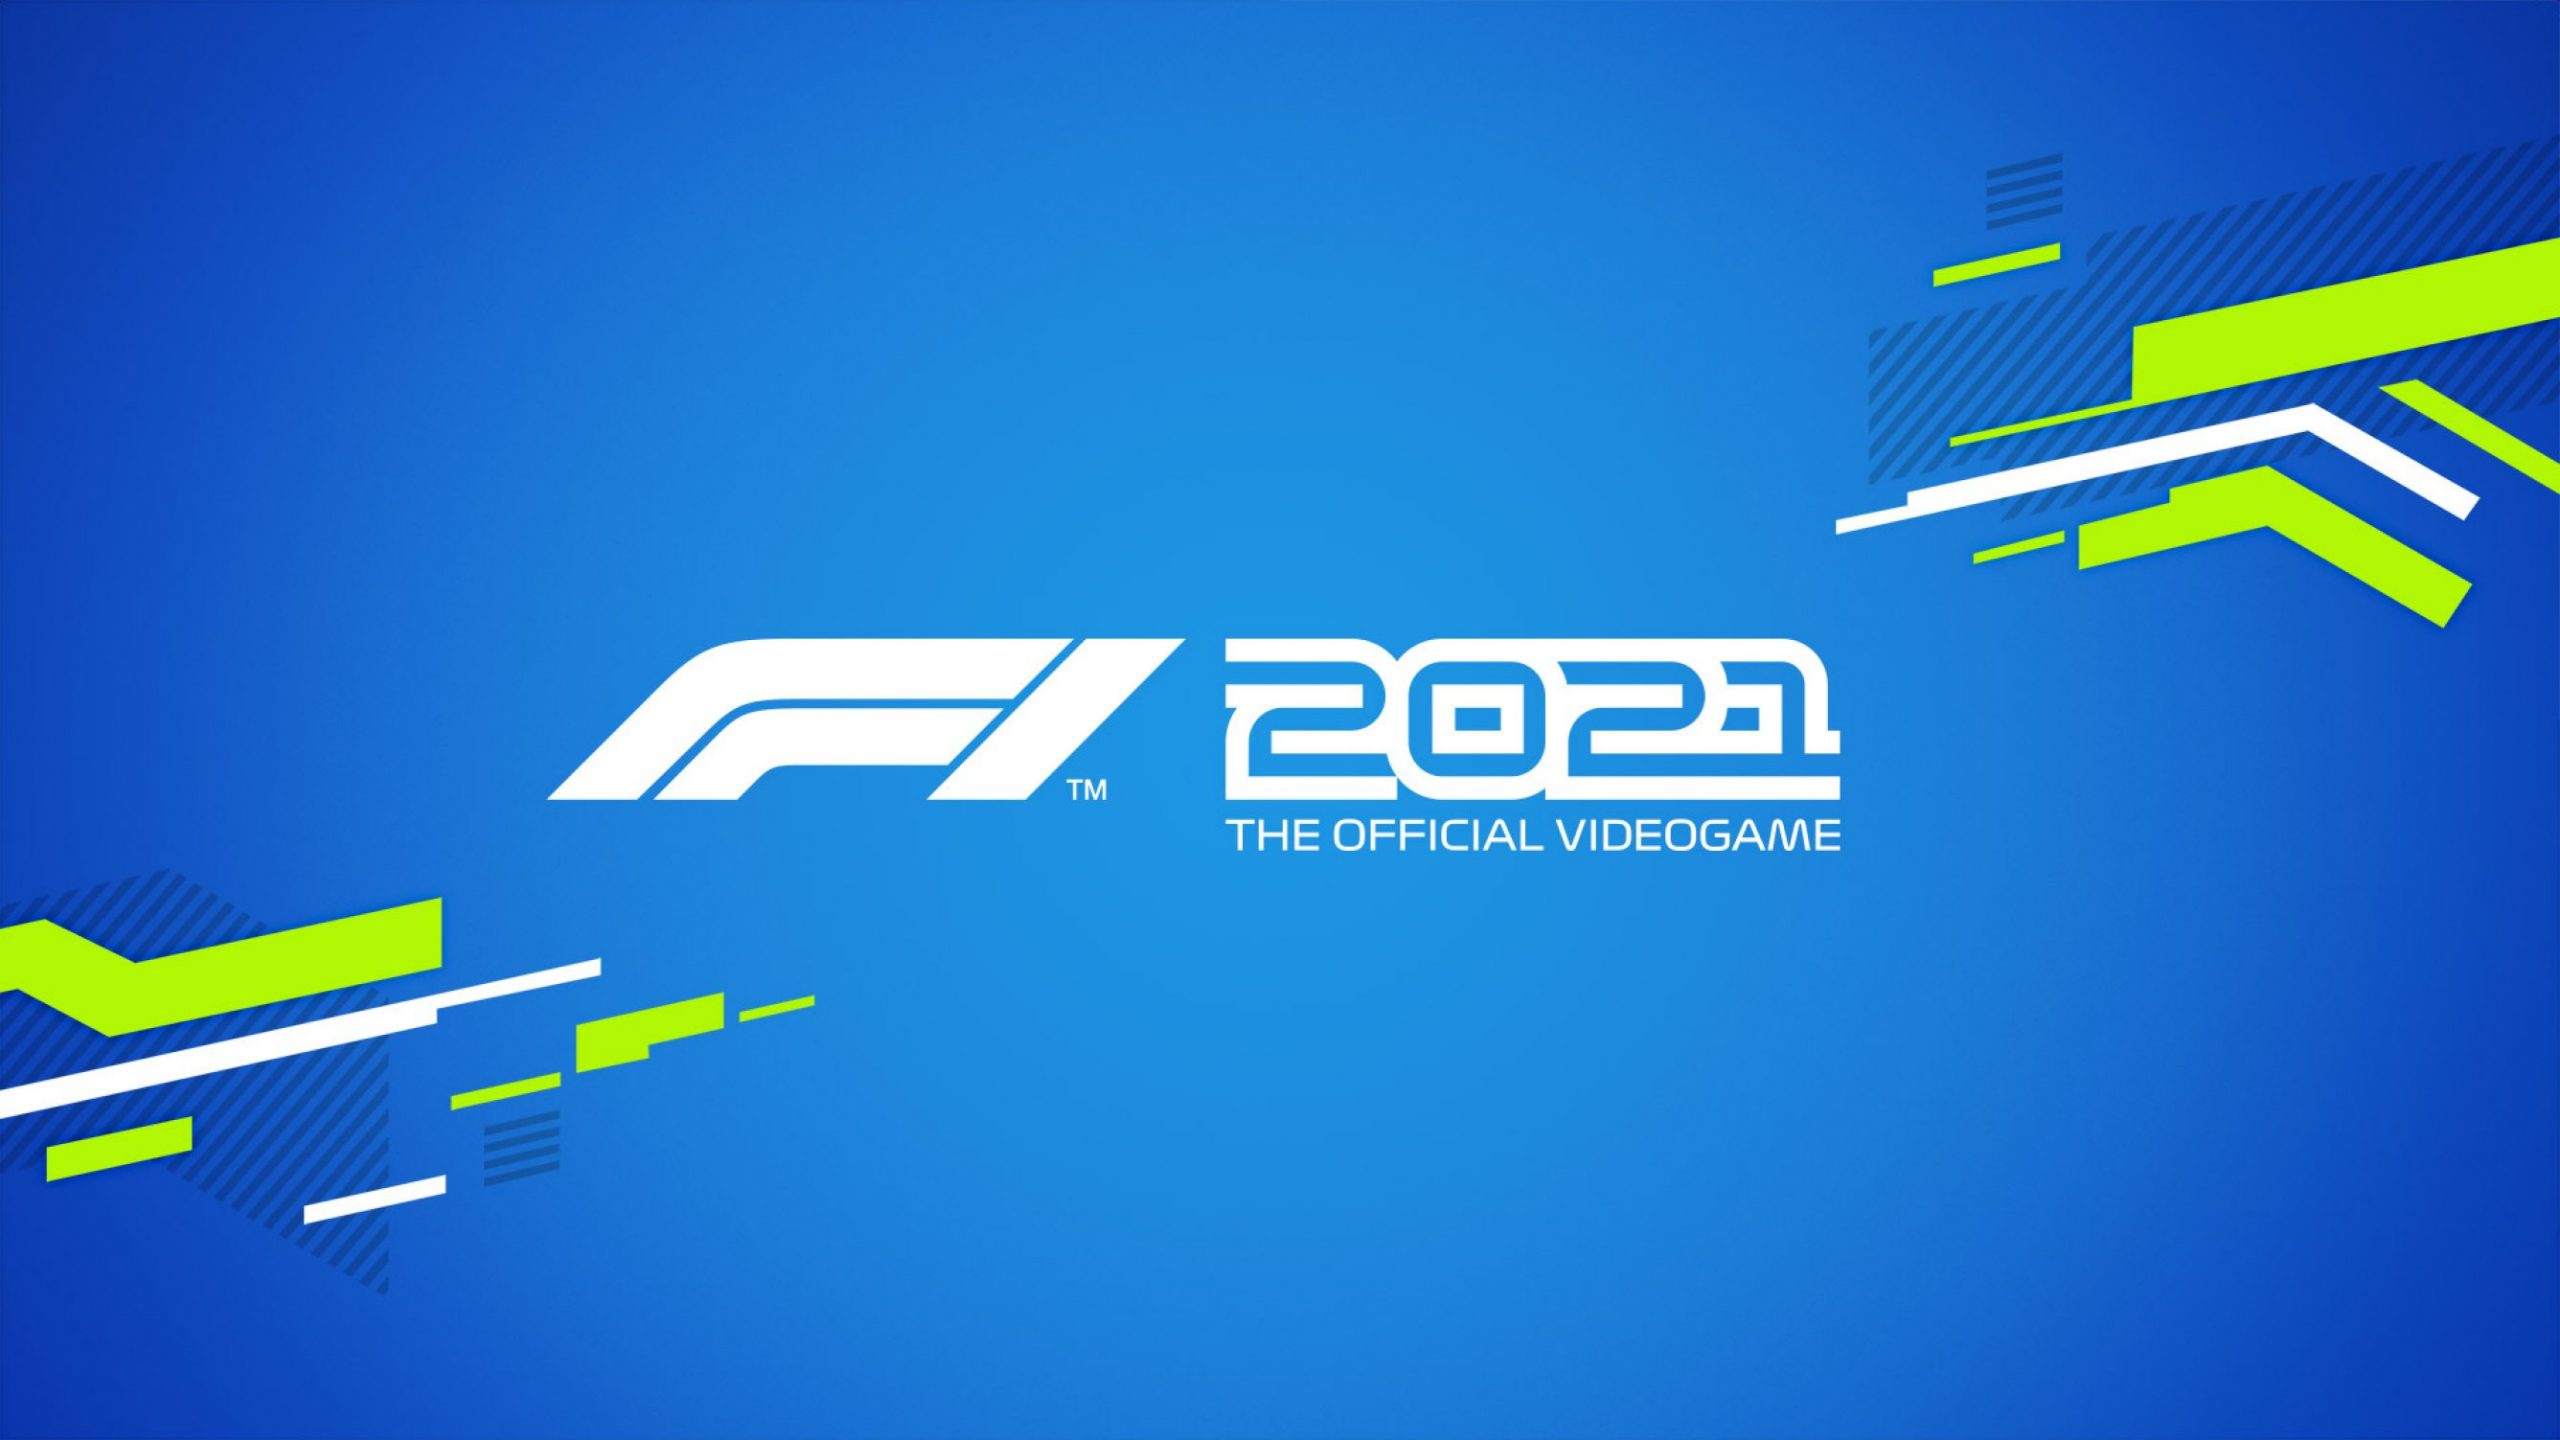 F1 2021 Release Date Revealed